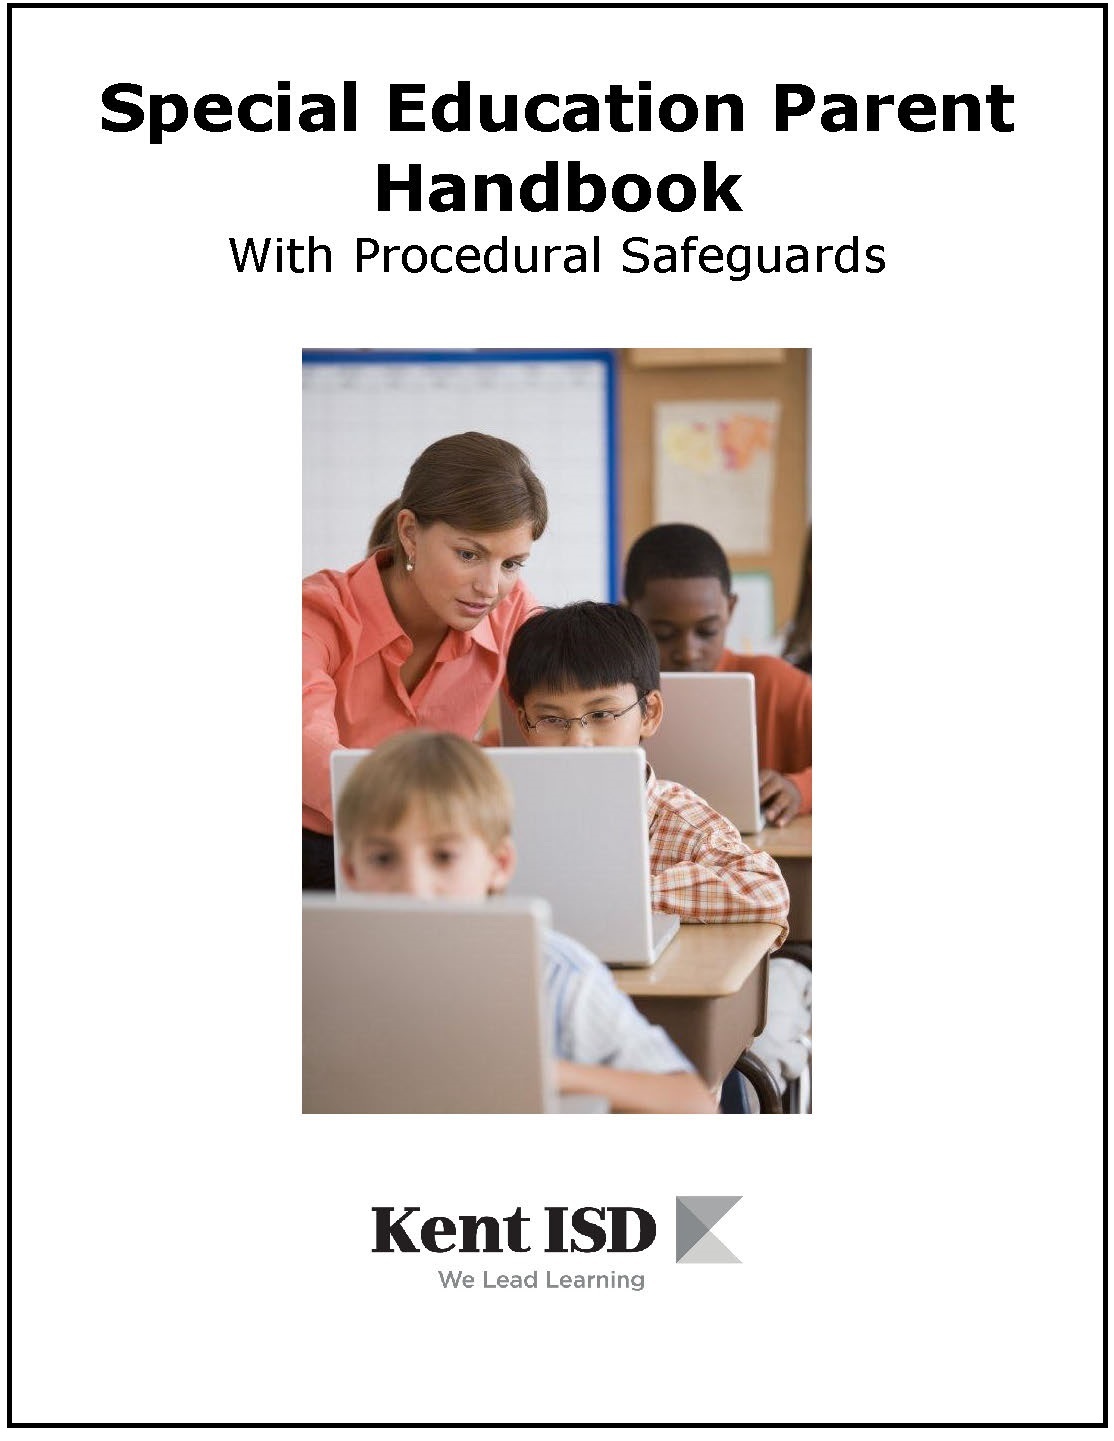 Cover pic of Handbook with Link